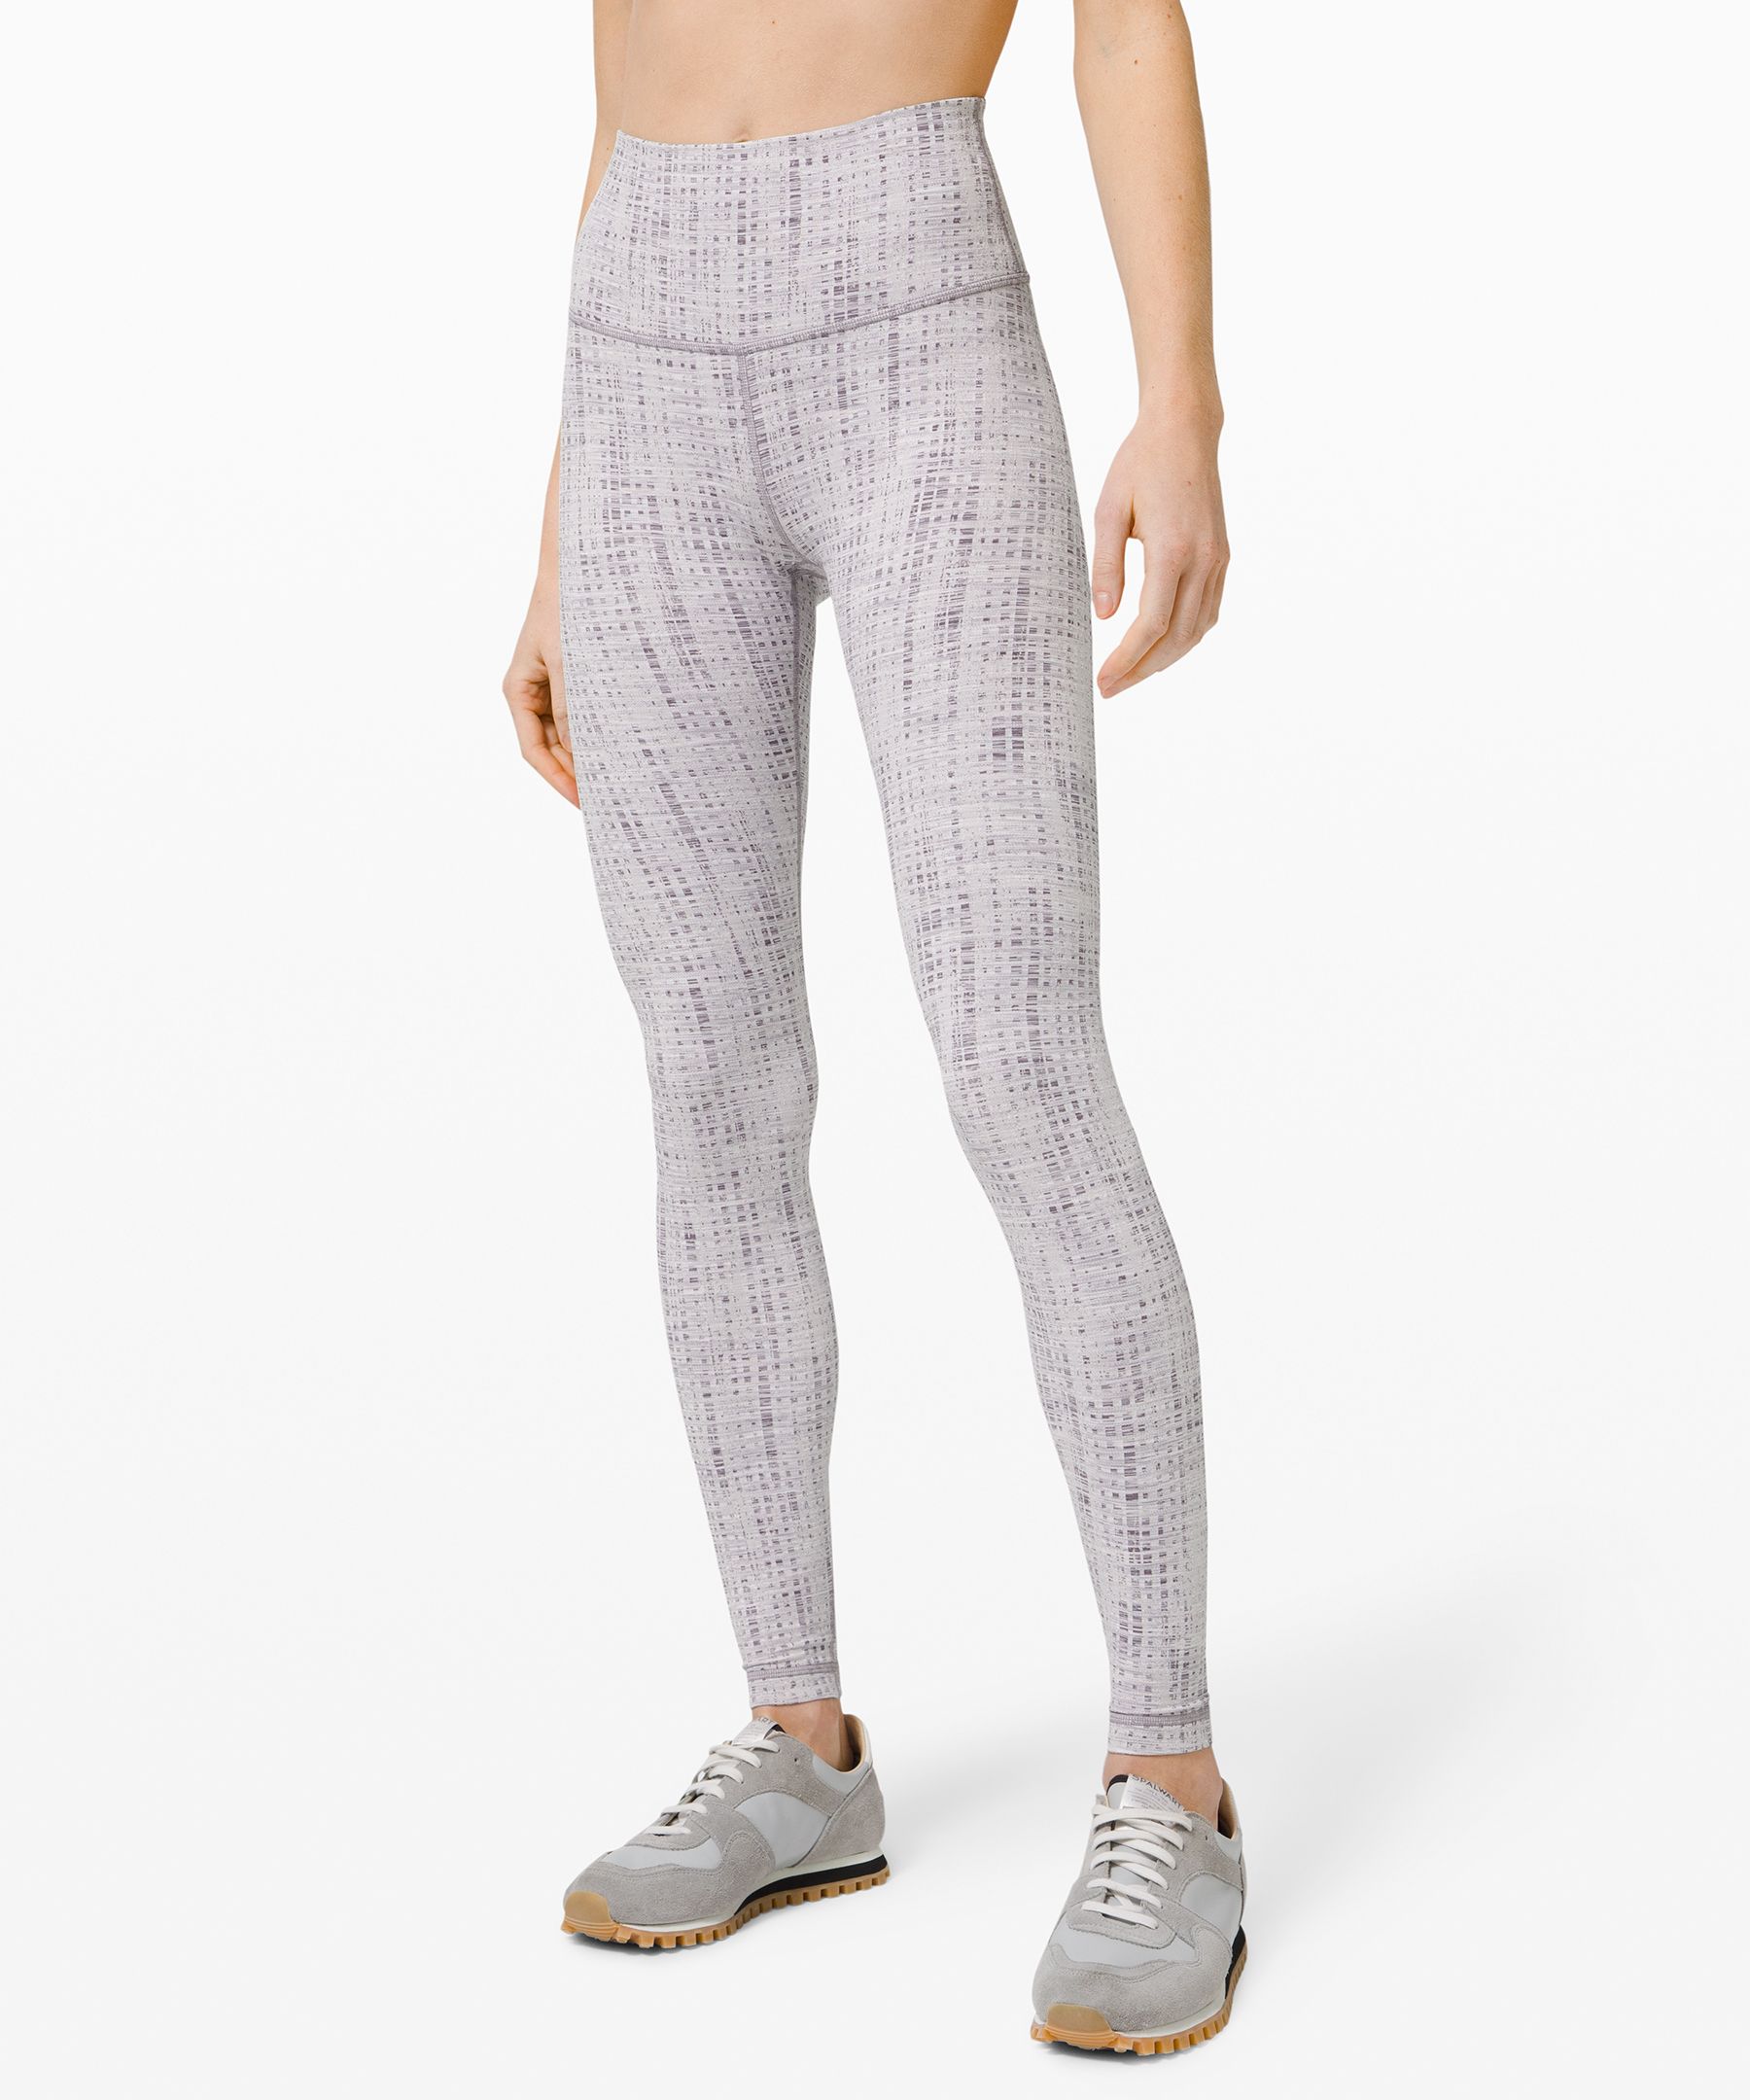 Lululemon Wunder Under High-rise Tight *luxtreme 28" In Action Jacquard Moonphase Silver Lining